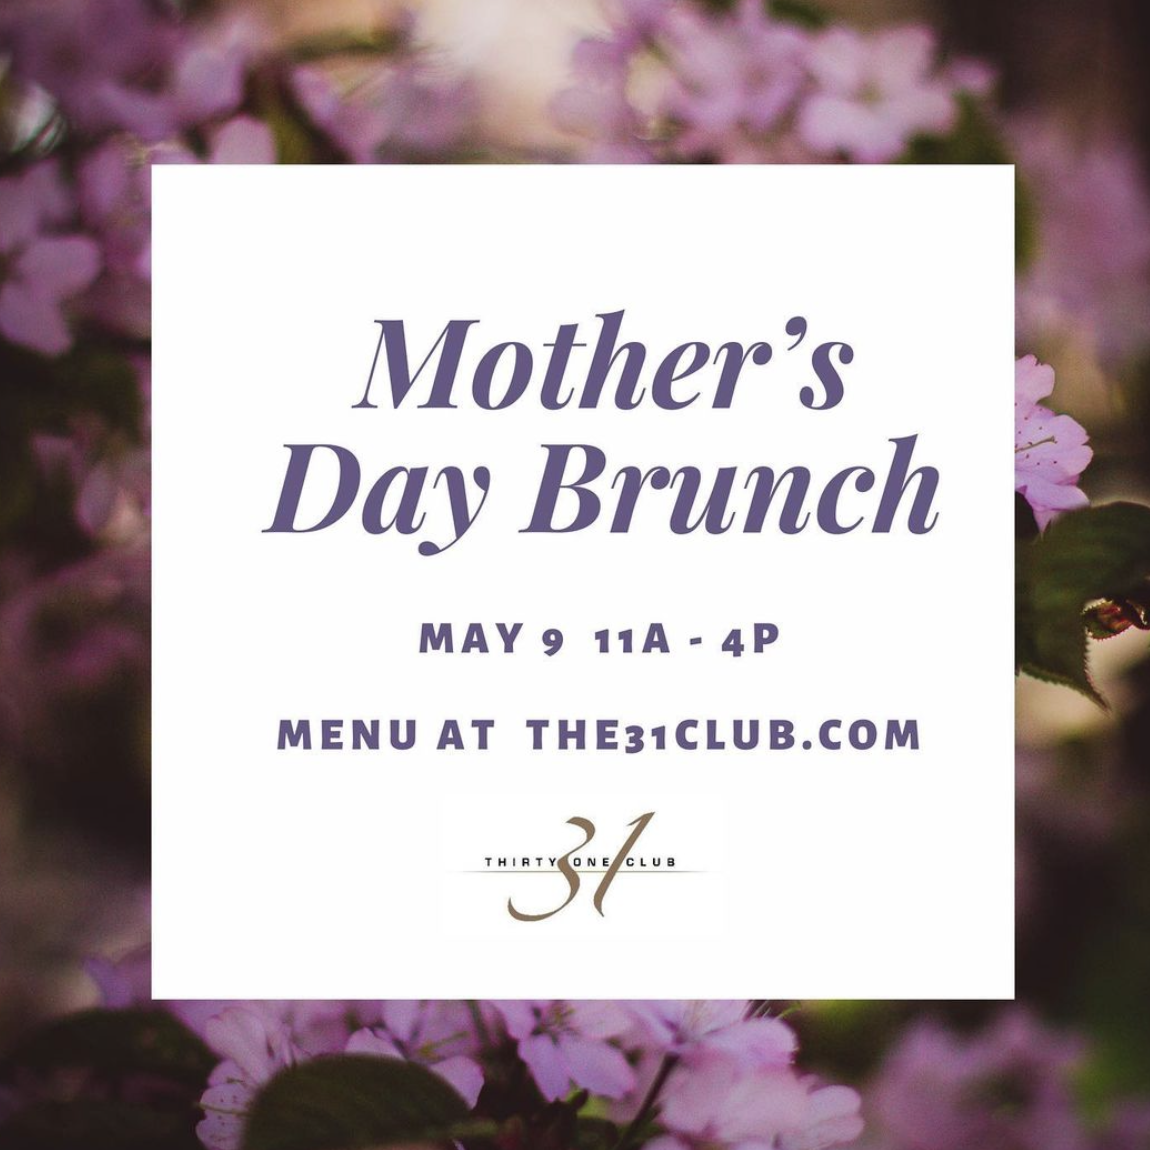 Mother's Day Brunch at The 31 Club Buffalo Place